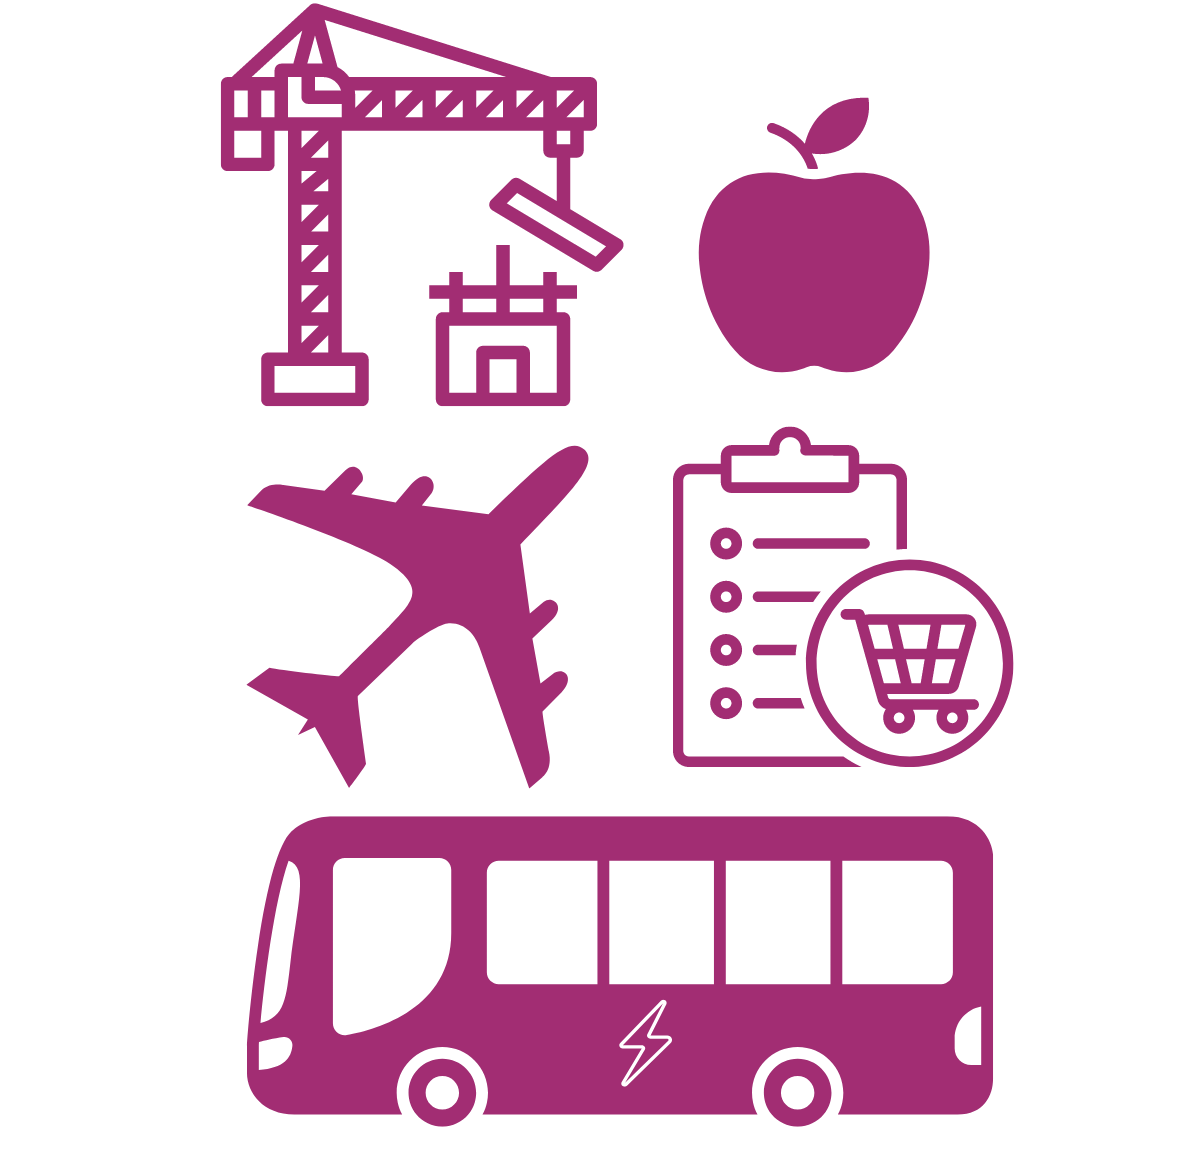 Graphic icon showing Scope 3 priority areas for Harvard: construction, food, plane/flights, purchasing (demonstrated by a clipboard and shopping cart), and an electric bus to represent commuting.